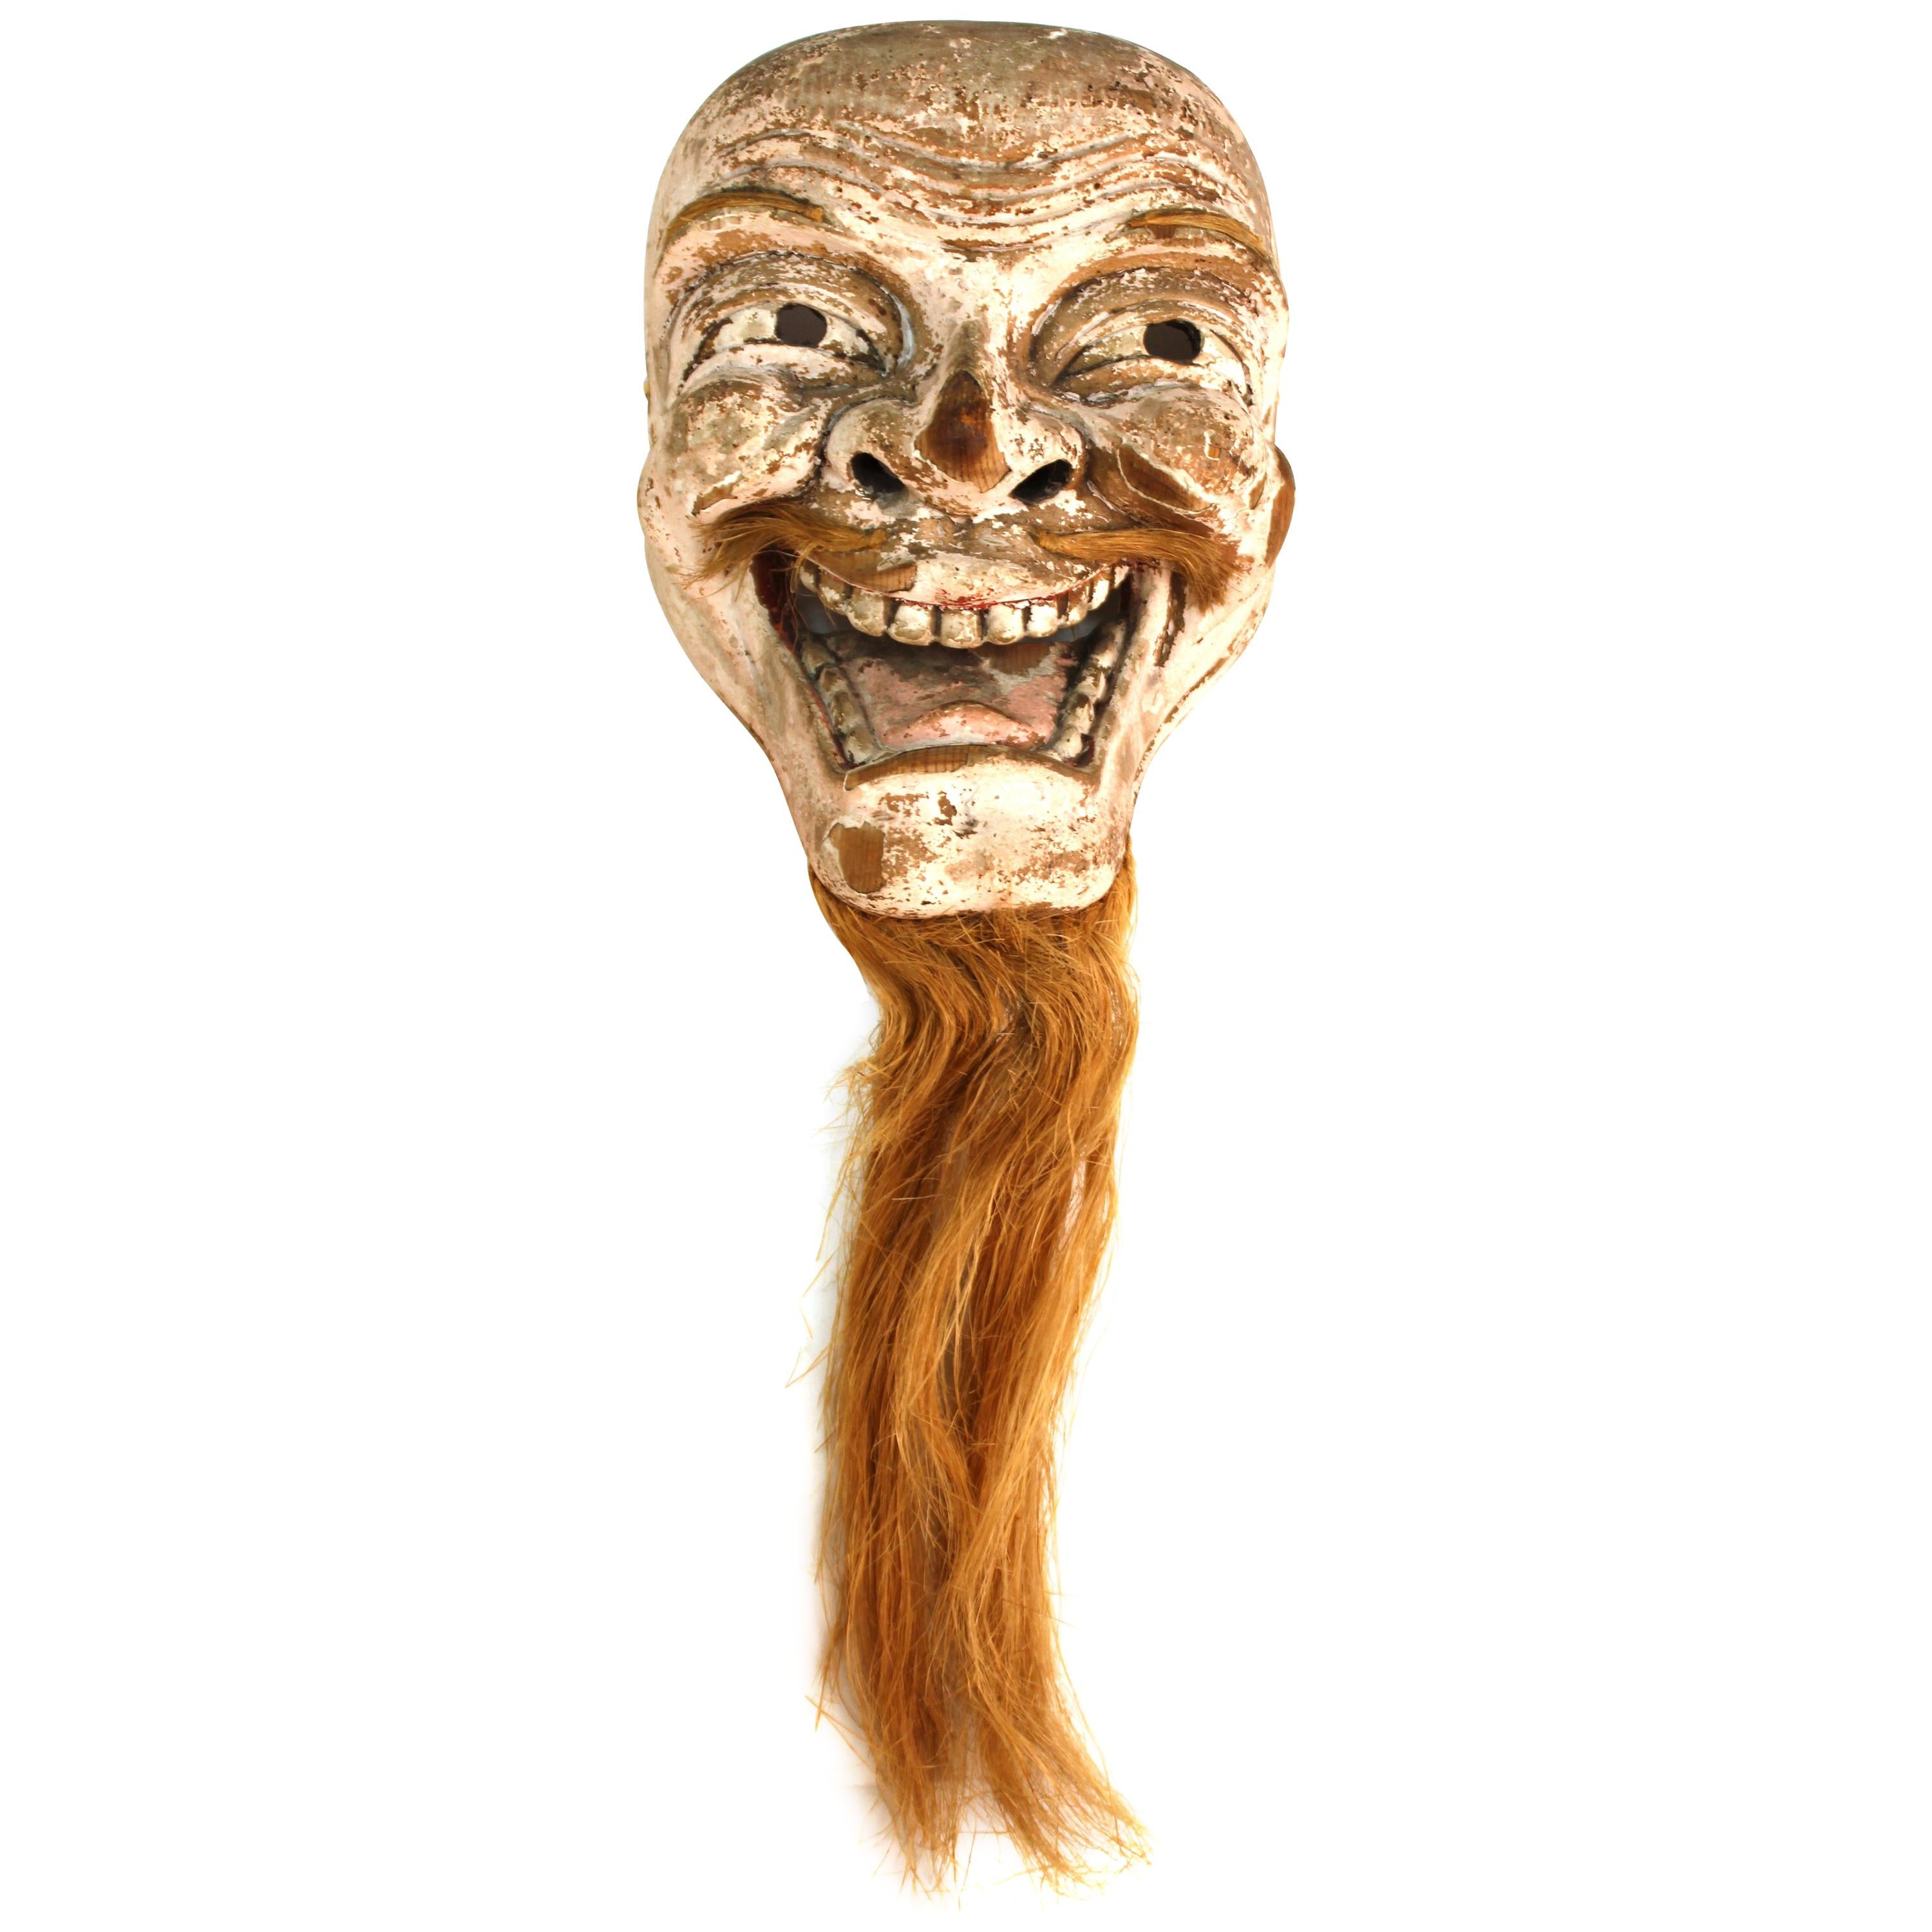 Japanese Edo Period Carved Wood Mask of Man with Golden Beard